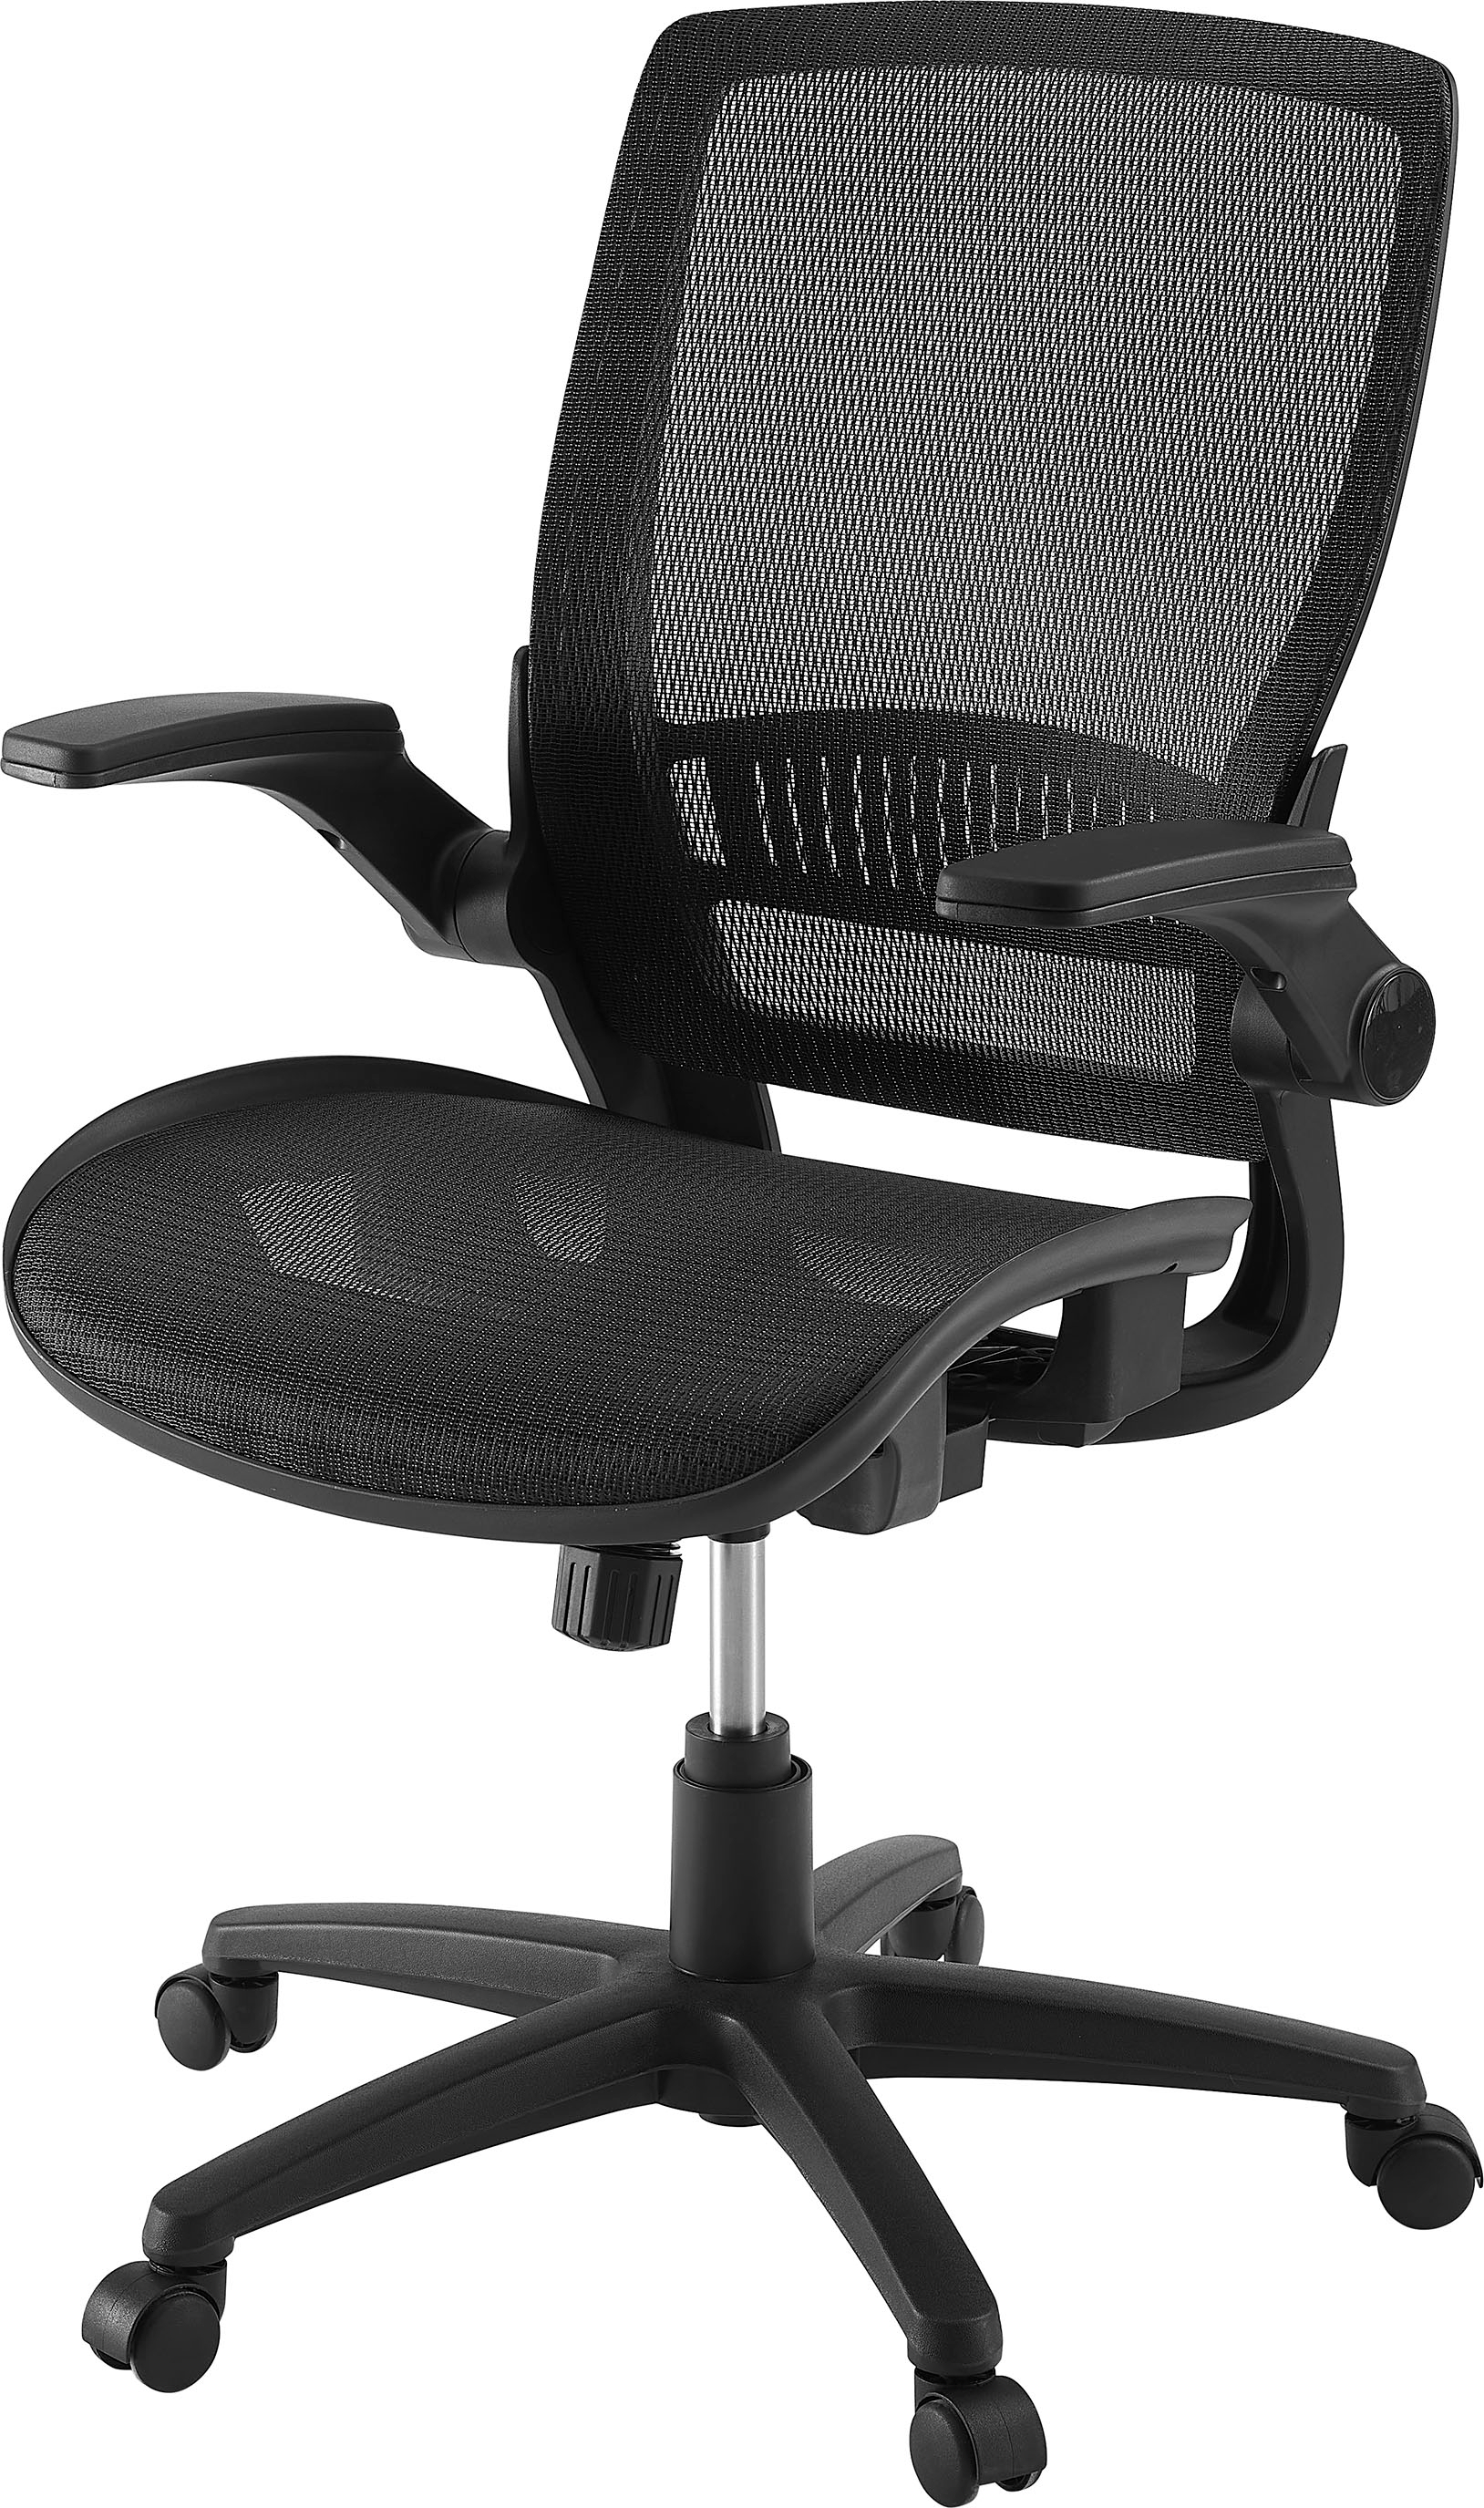 Left View: Serta - Essentials Mesh & Faux Leather Task Chair - Black